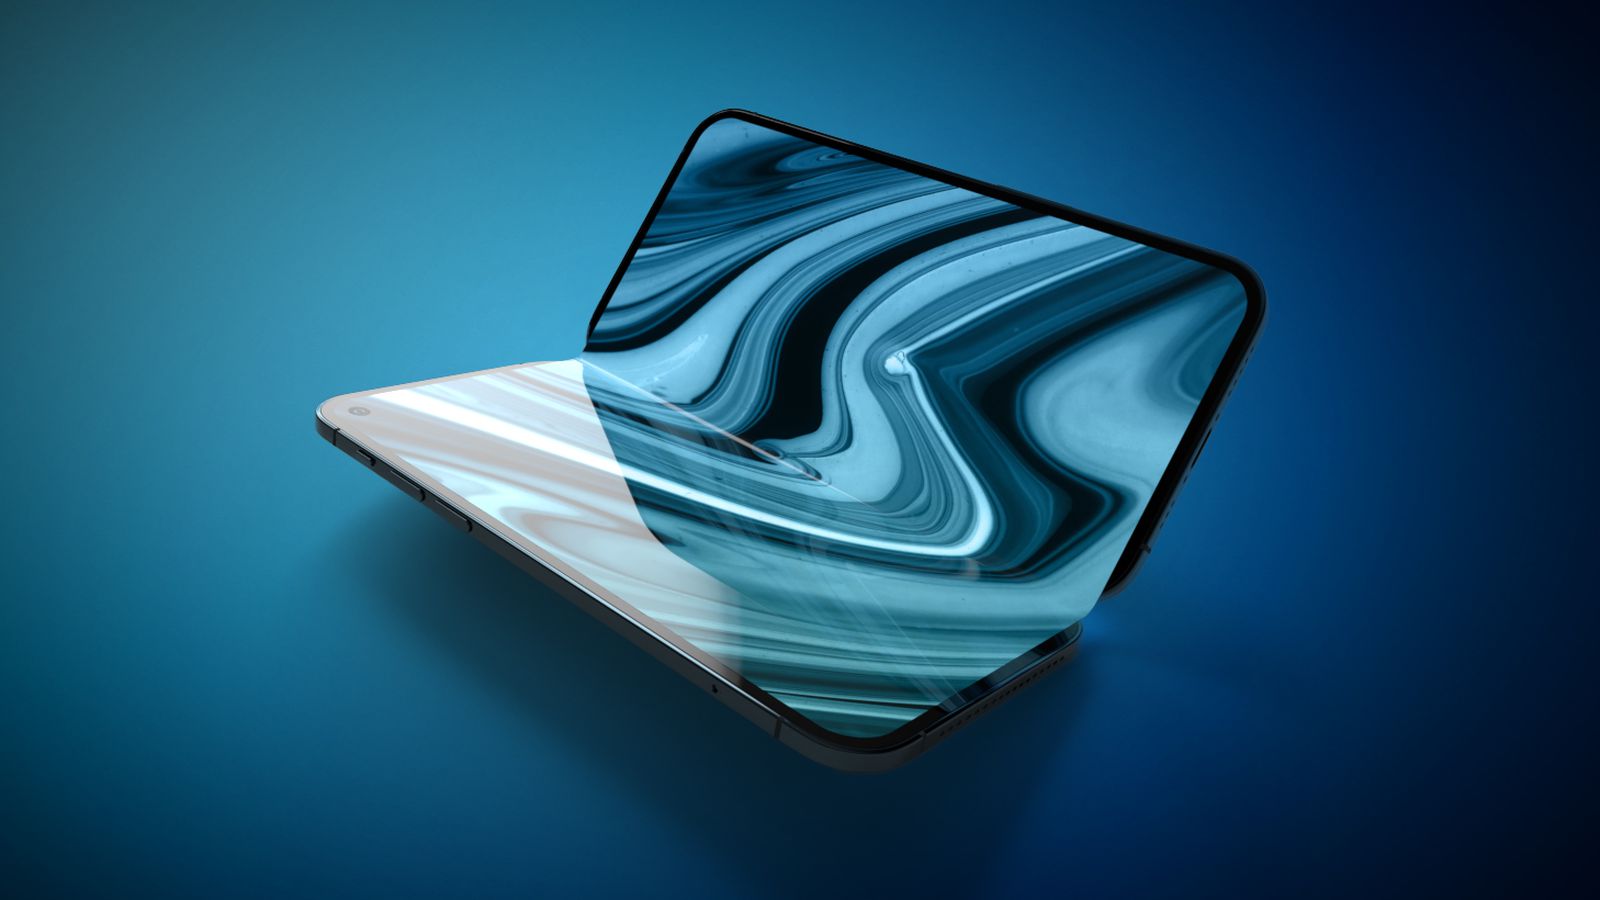 Kuo: Apple Testing Color ‘Electronic Paper Display’ Technology for Future Foldable Devices and Tablet Applications